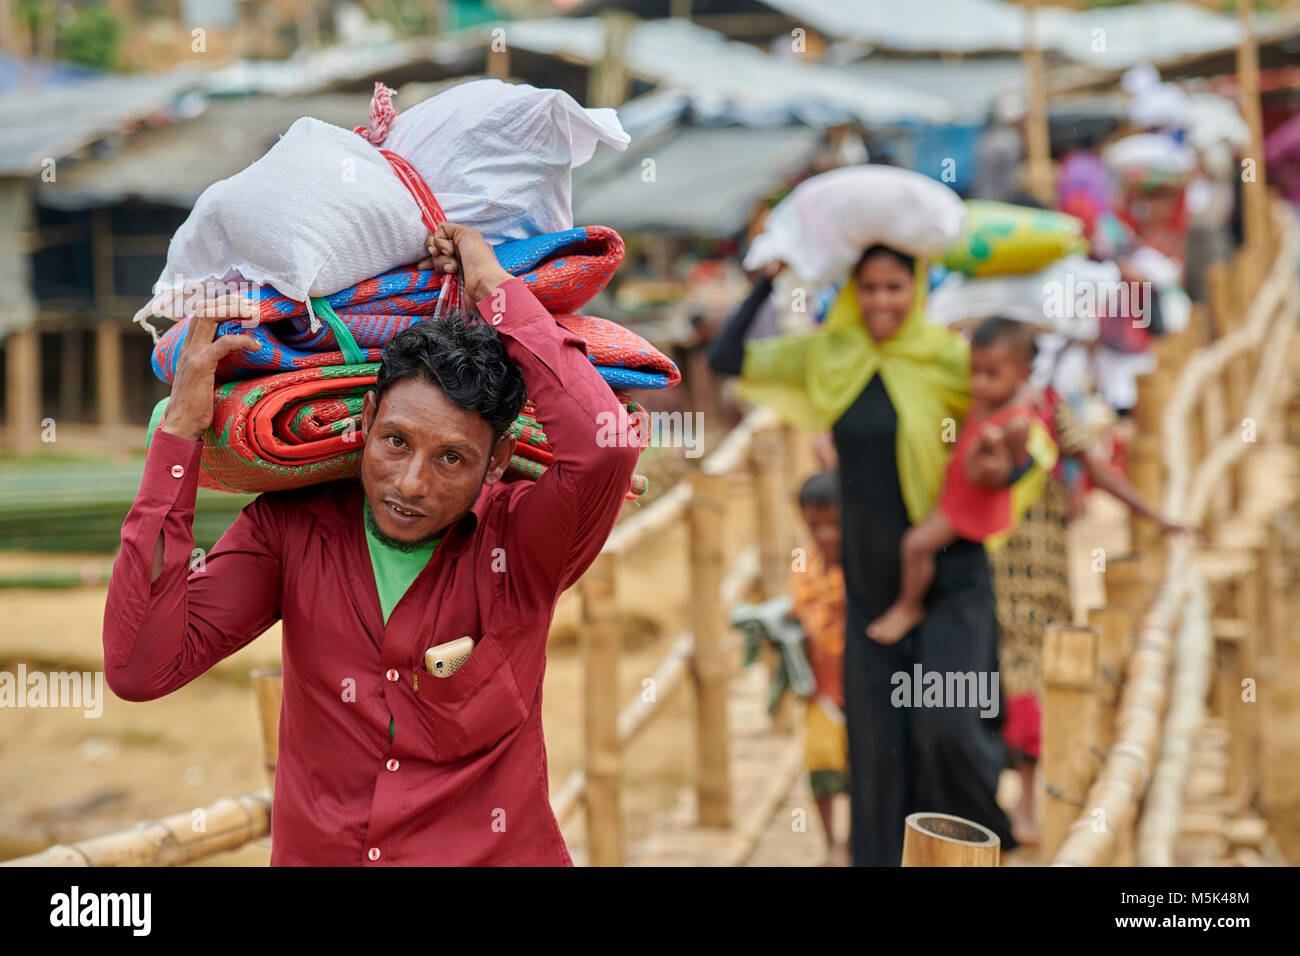 Carrying emergency shelter materials and food, Rohingya refugees cross a rickety foot bridge in the sprawling Kutupalong Refugee Camp in Bangladesh. Stock Photo